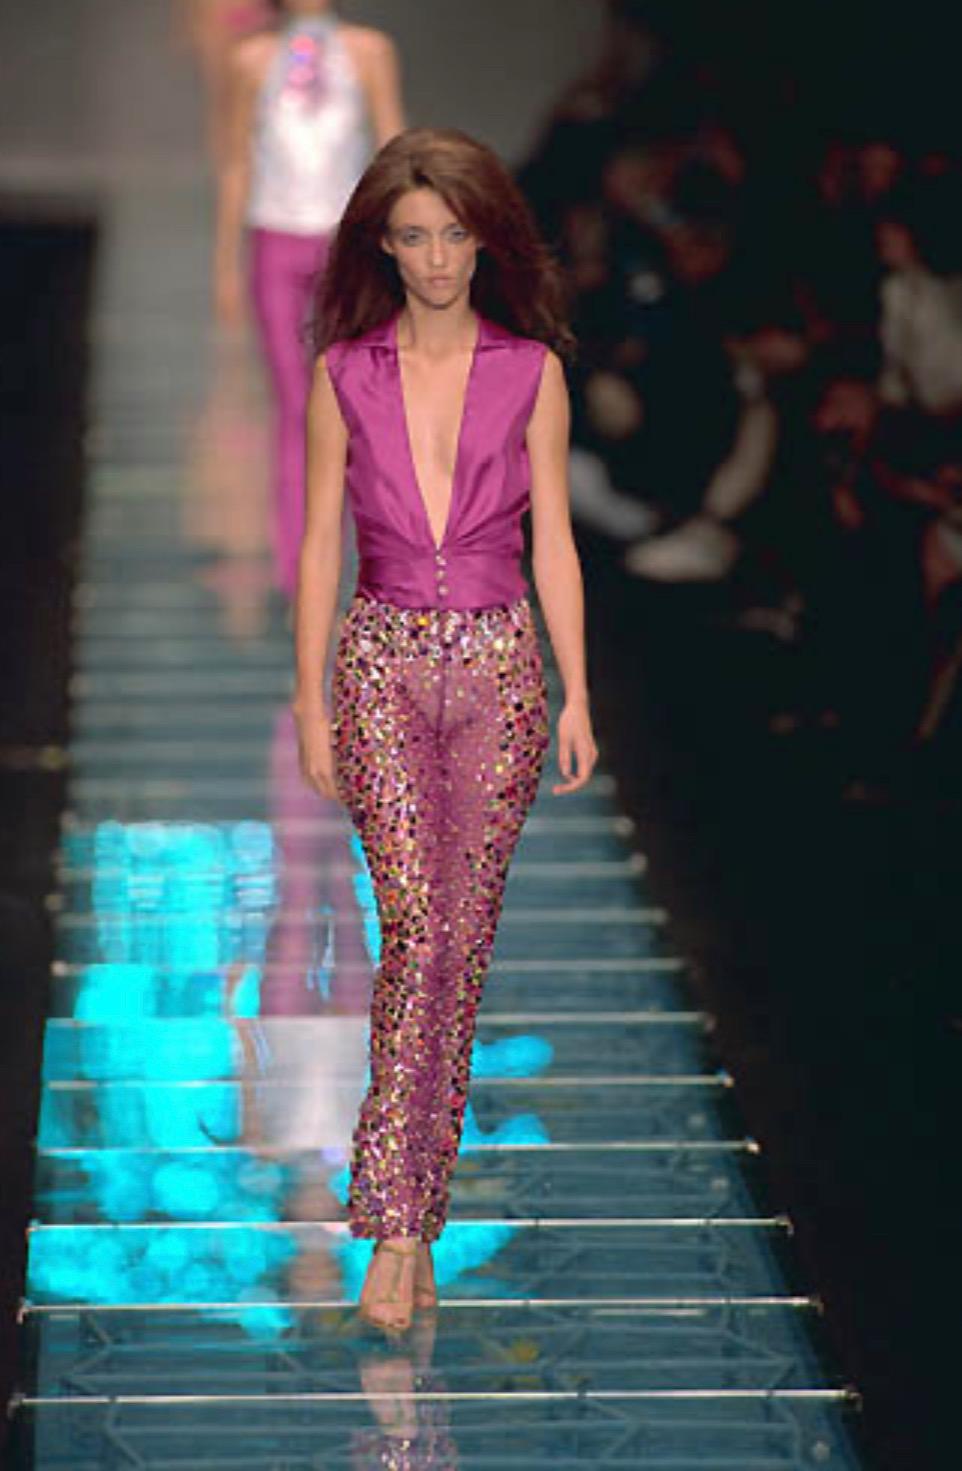 Presenting an incredible bright purple Gianni Versace Couture shirt, designed by Donatella Versace. From the Spring/Summer 2000 collection, this top debuted on the season's runway as part of look 53 modeled by Audrey Marnay. This sleeveless top